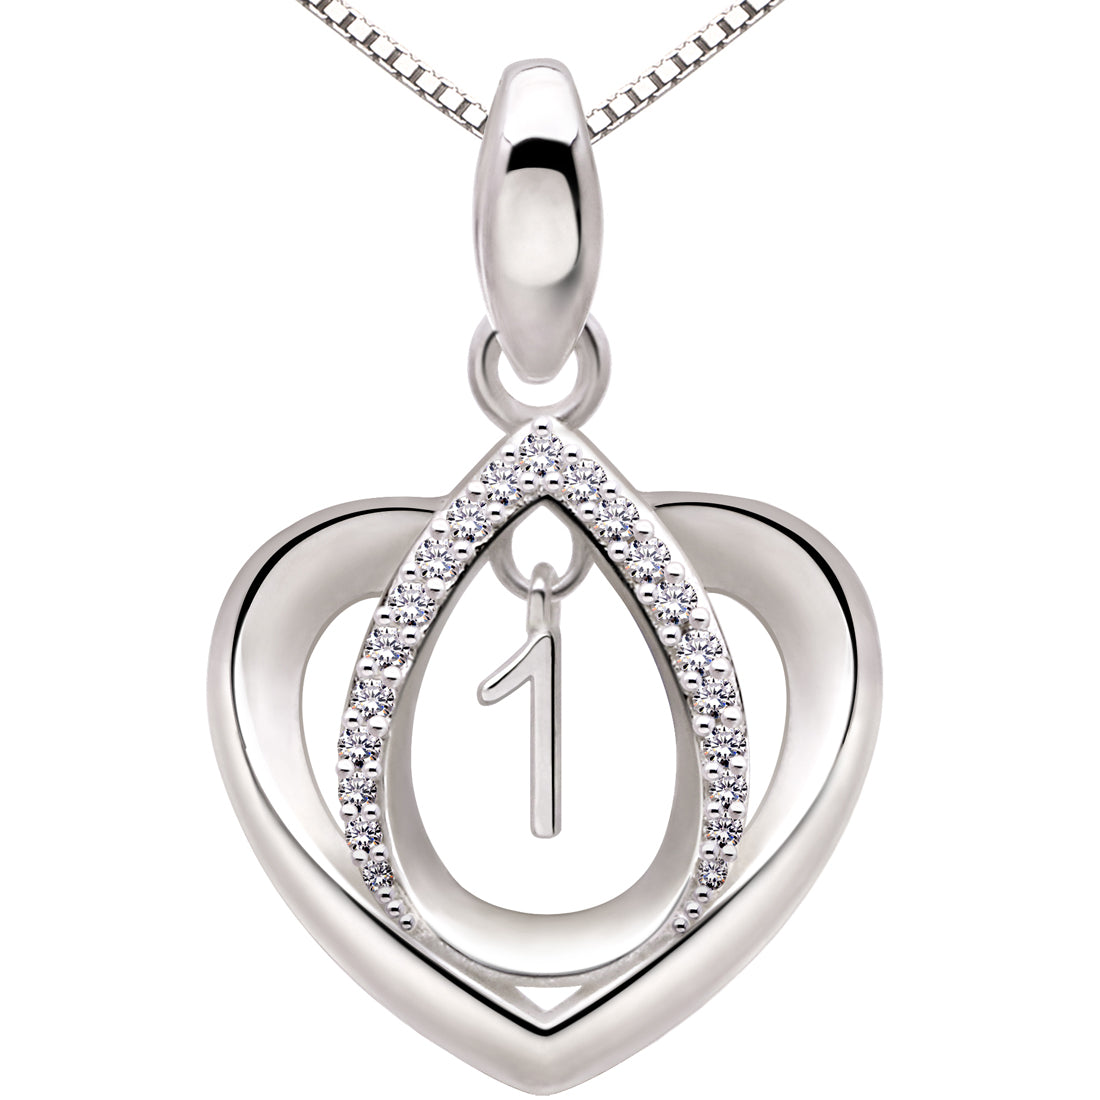 ALOV Jewelry Sterling Silver Lucky Number Anniversary Numeral Love Heart Cubic Zirconia Pendant Necklace